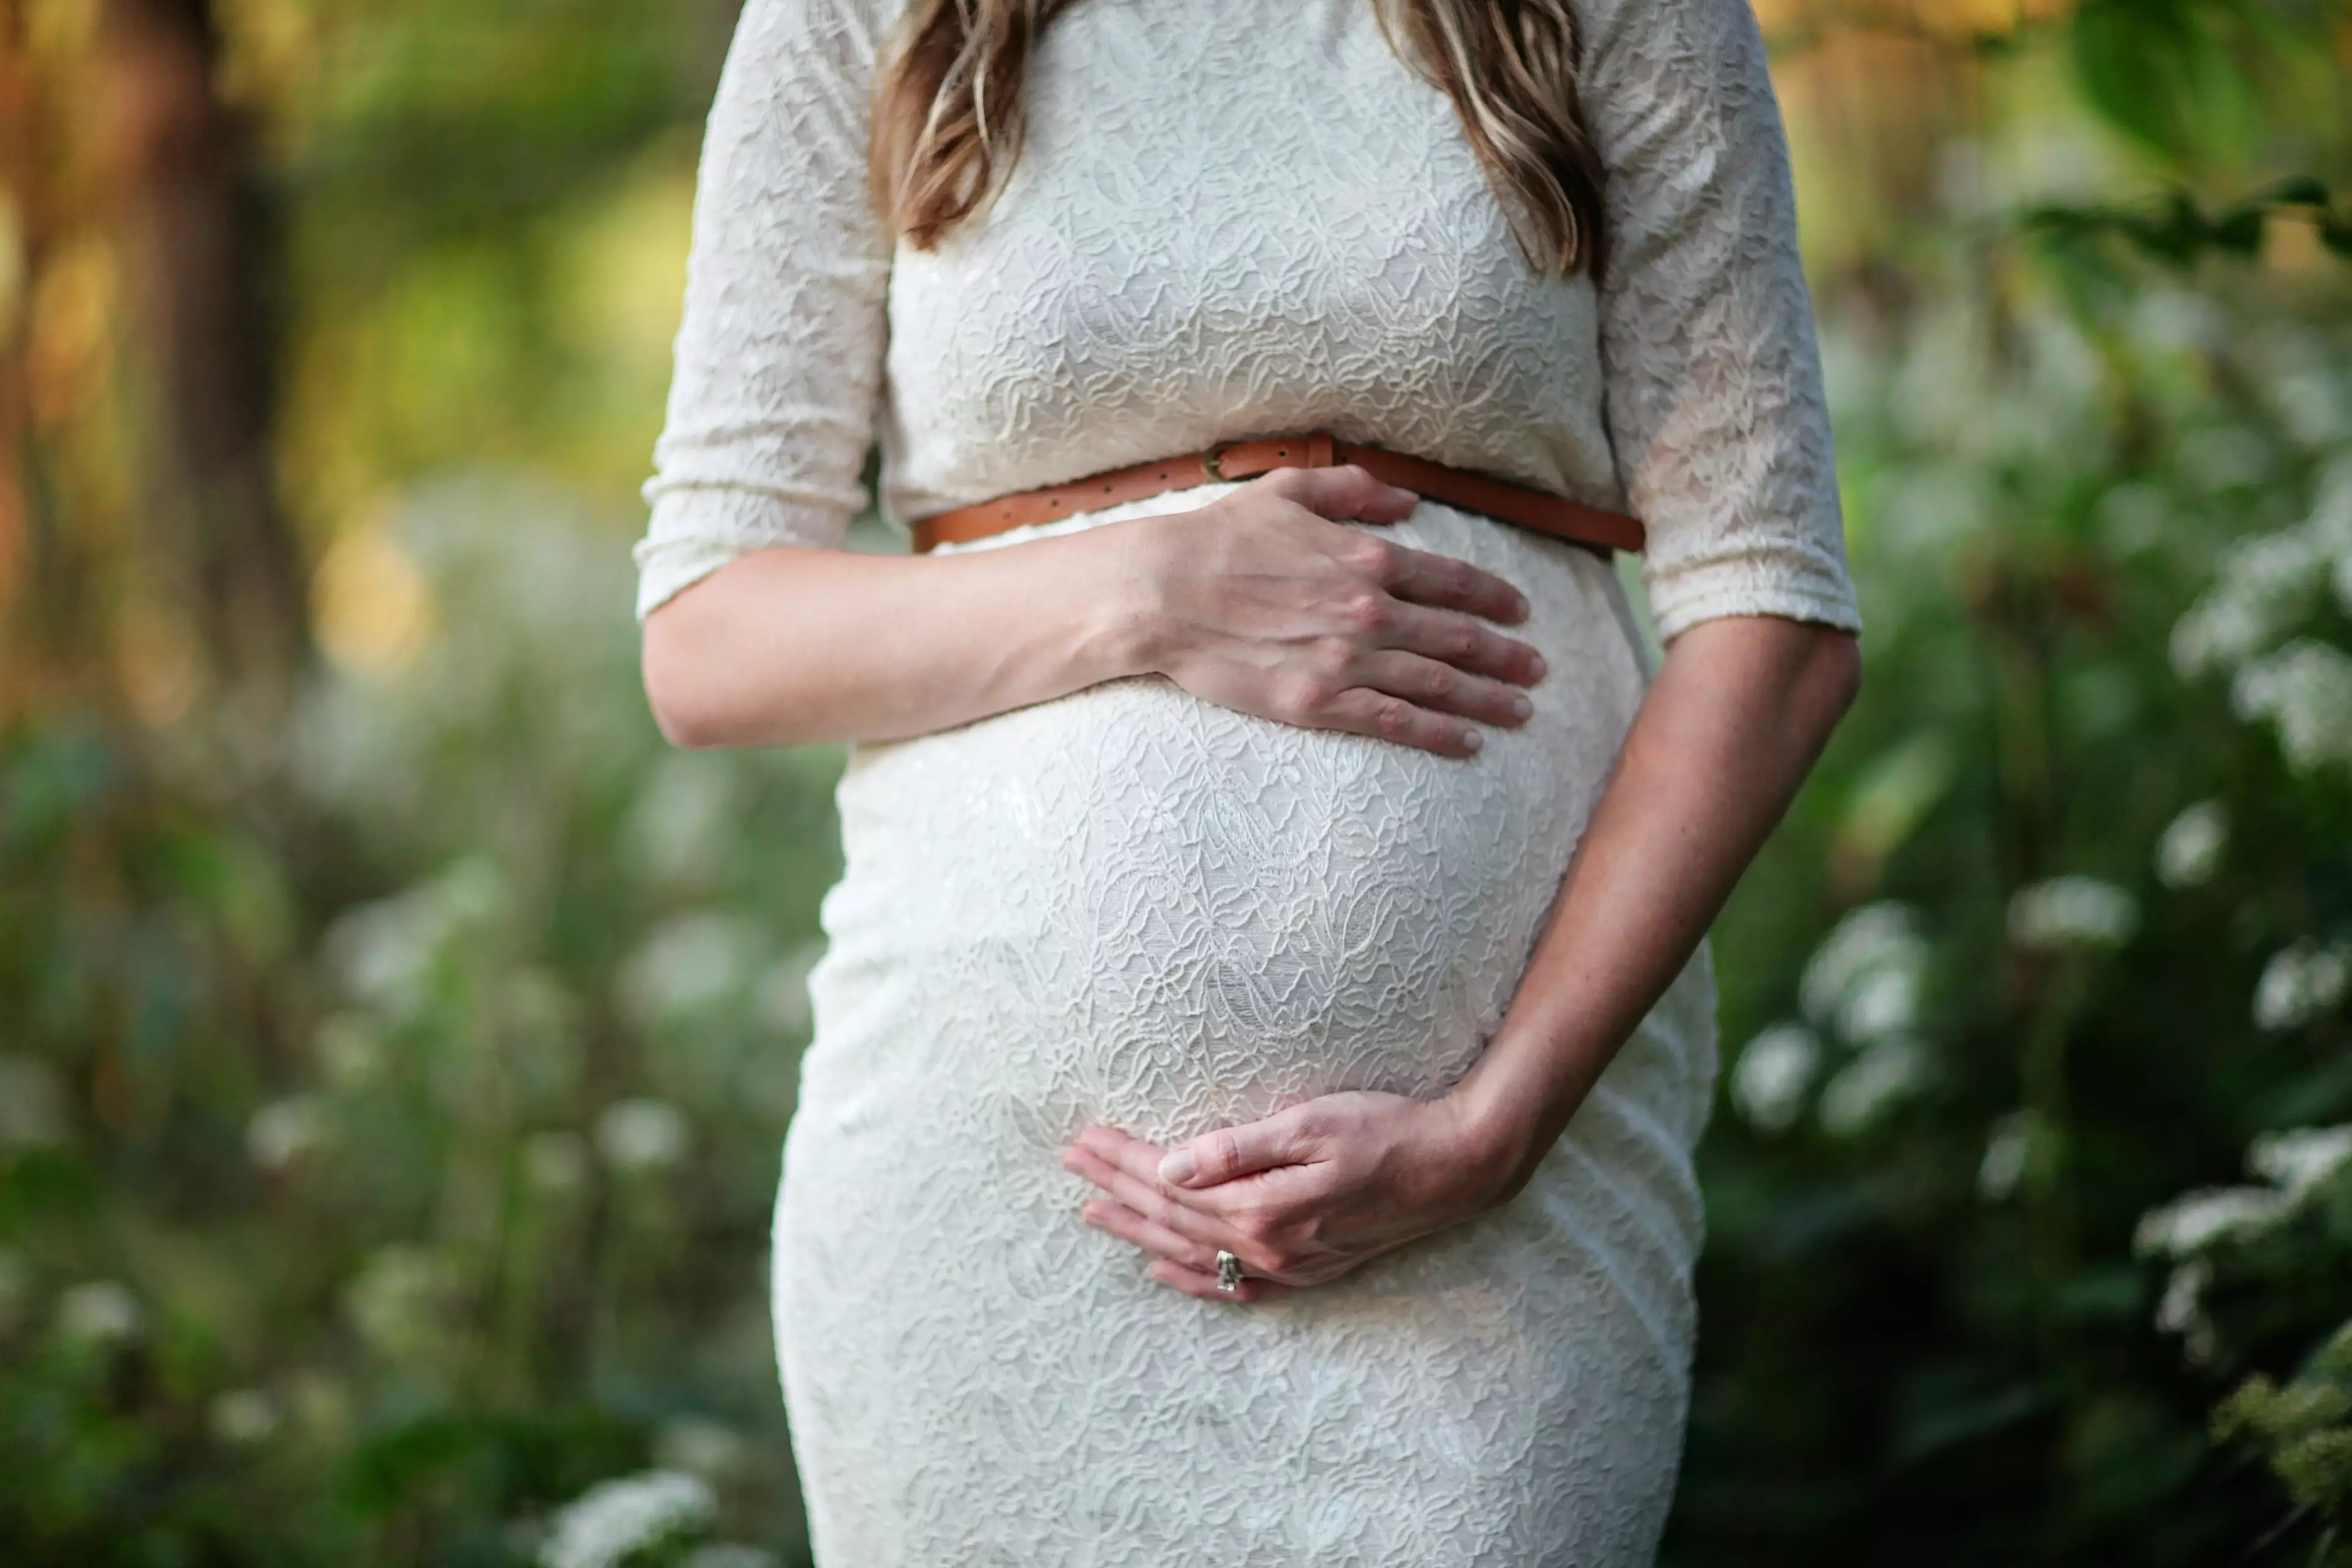 One woman fell pregnant with a third baby while already expecting twins (